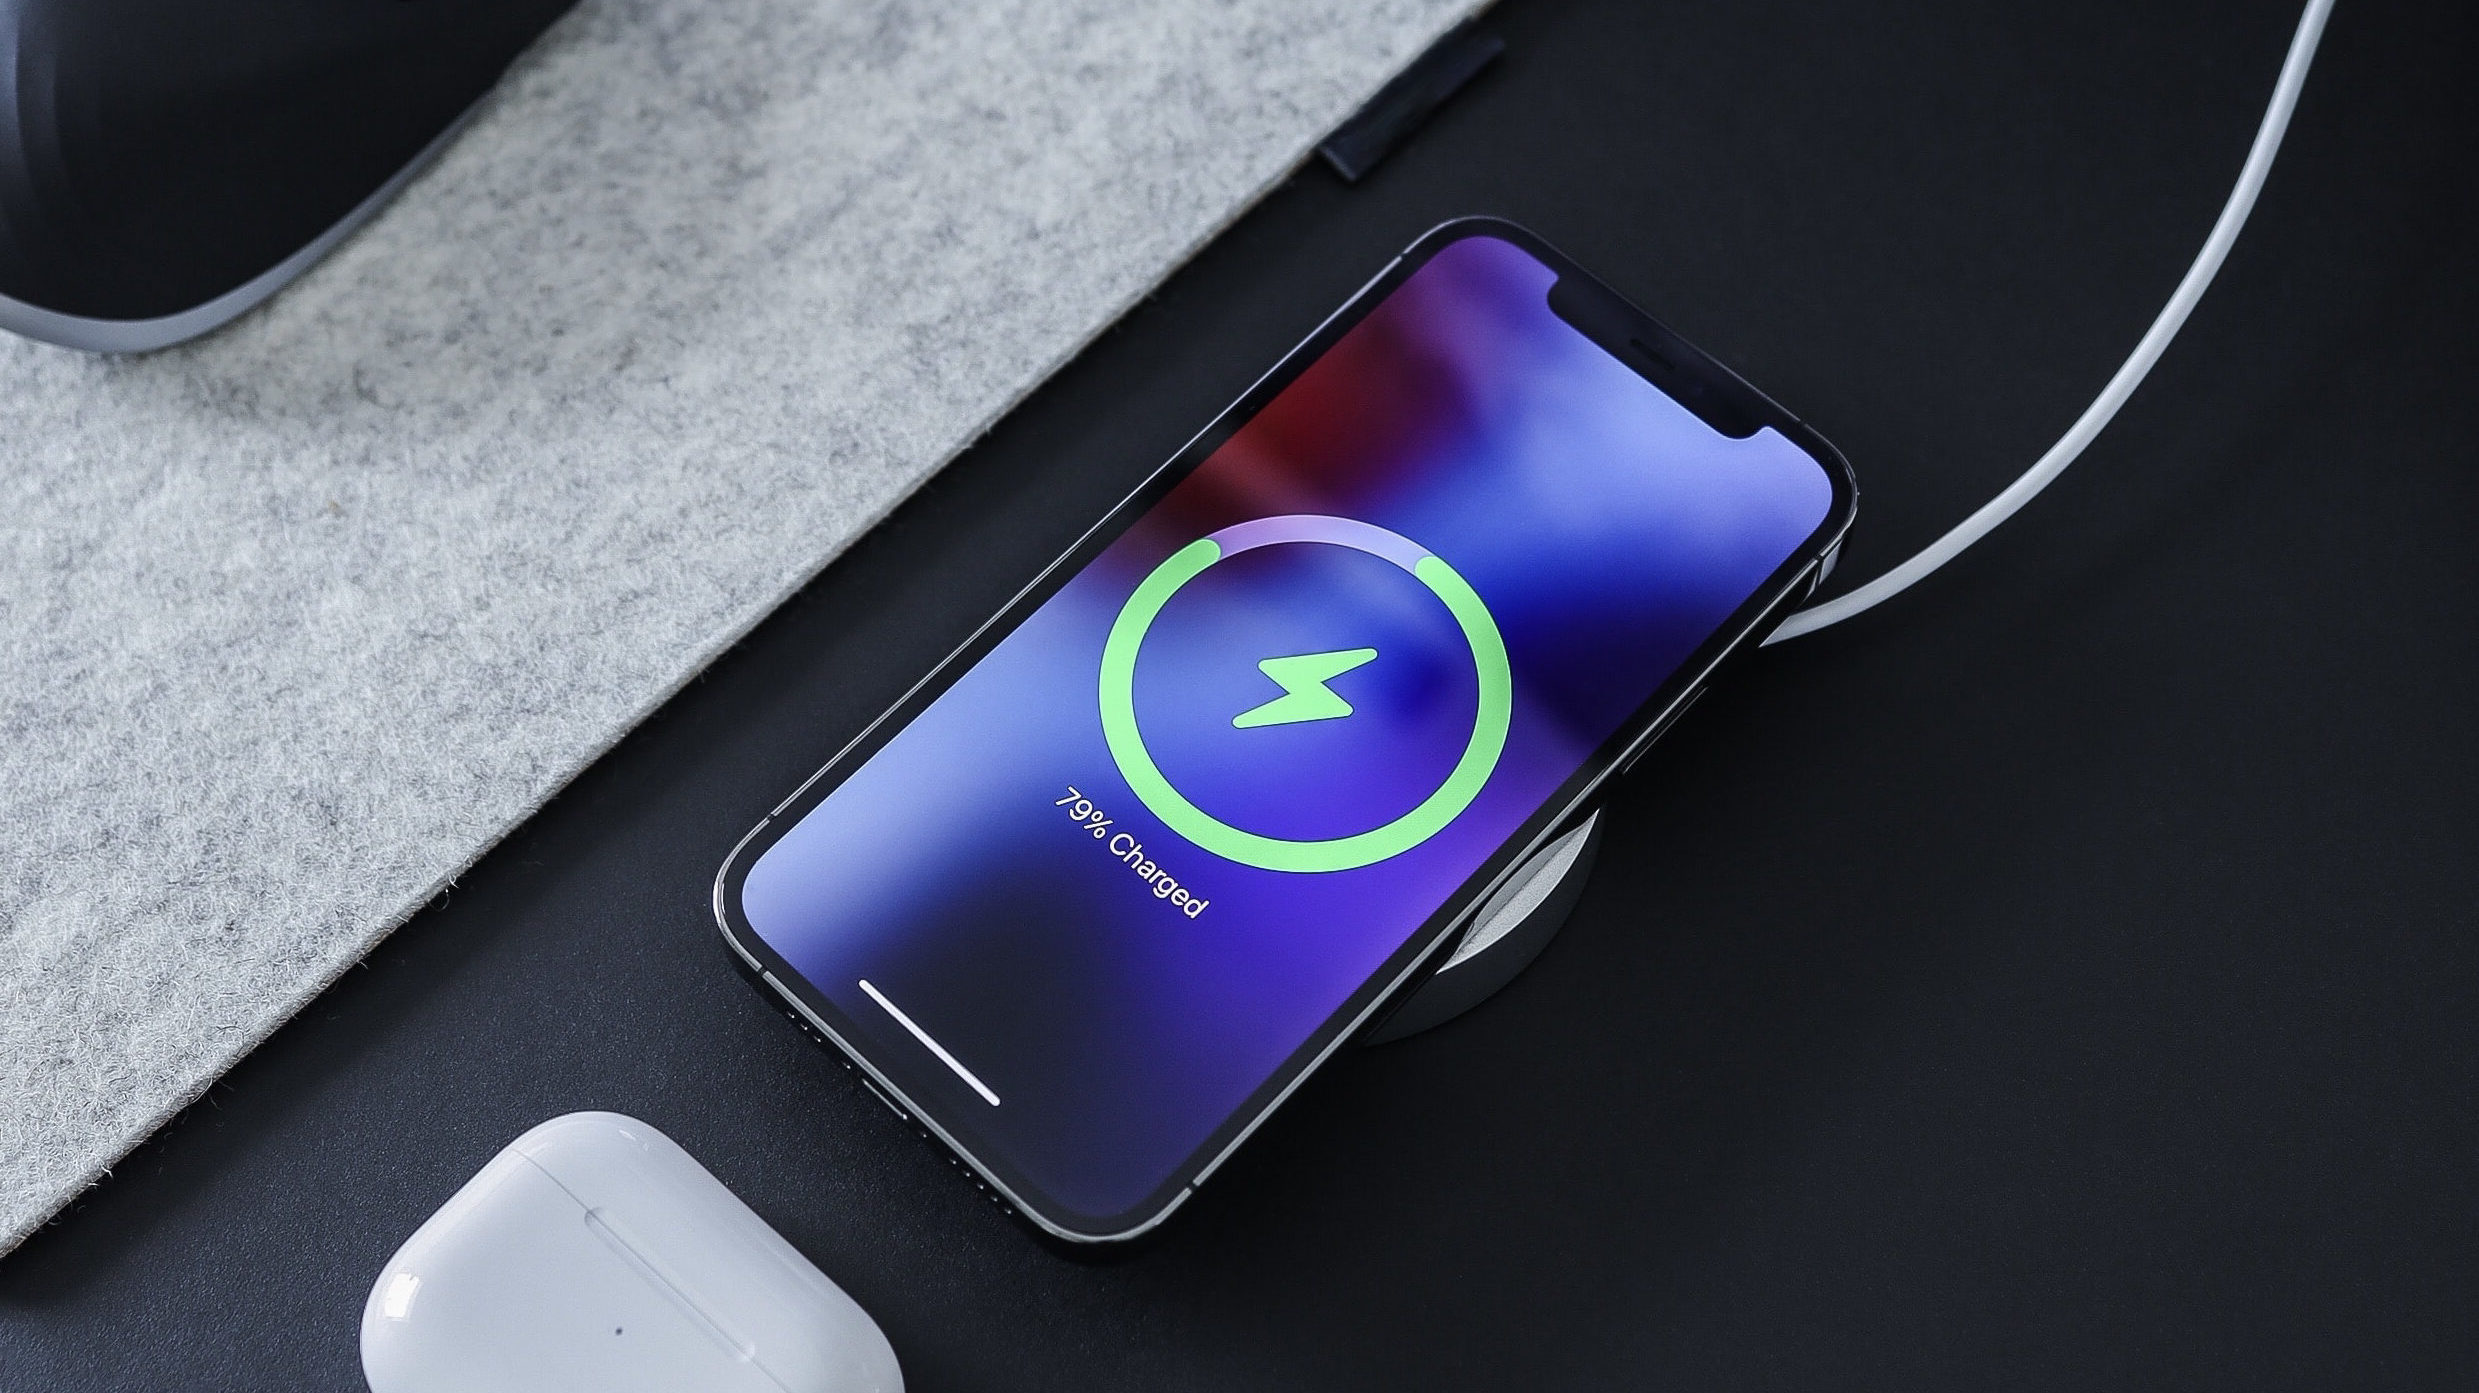 Recharging your phone's battery is a helpful metaphor to understand how topping up your energy increases your capacity.